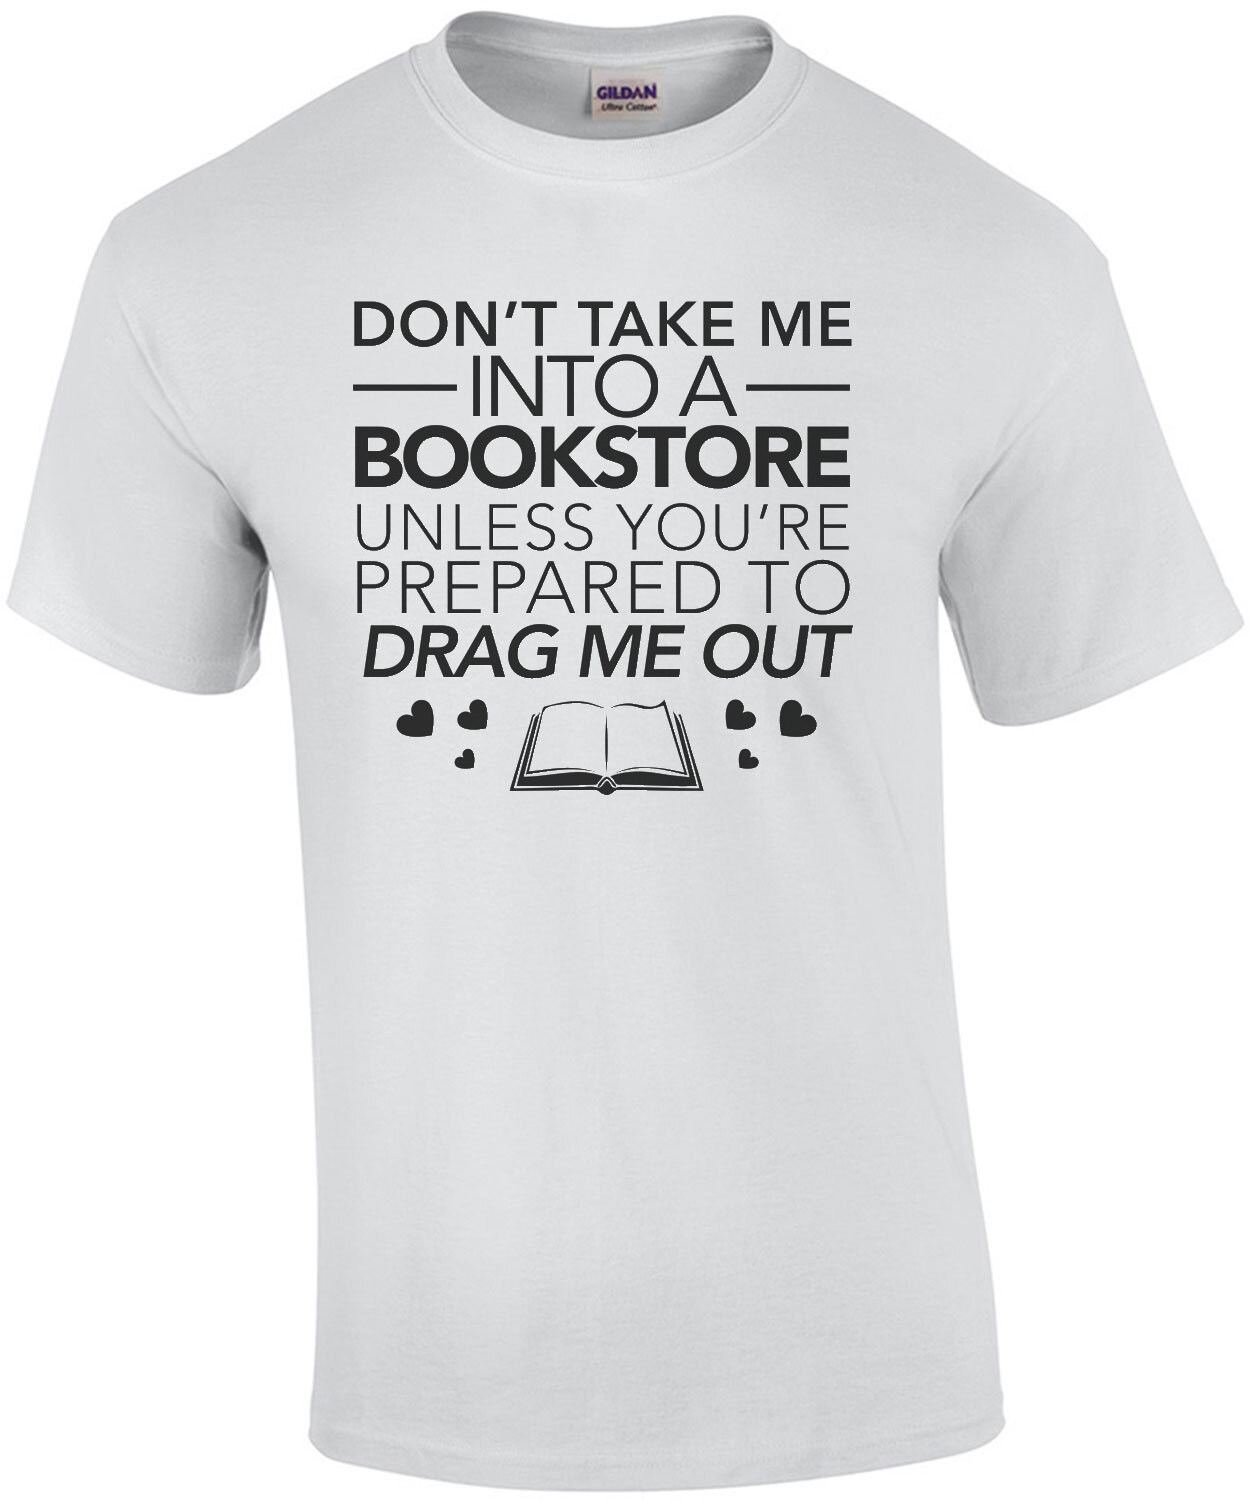 Don't take me into a bookstore unless you're prepared to drag me out - funny t-shirt